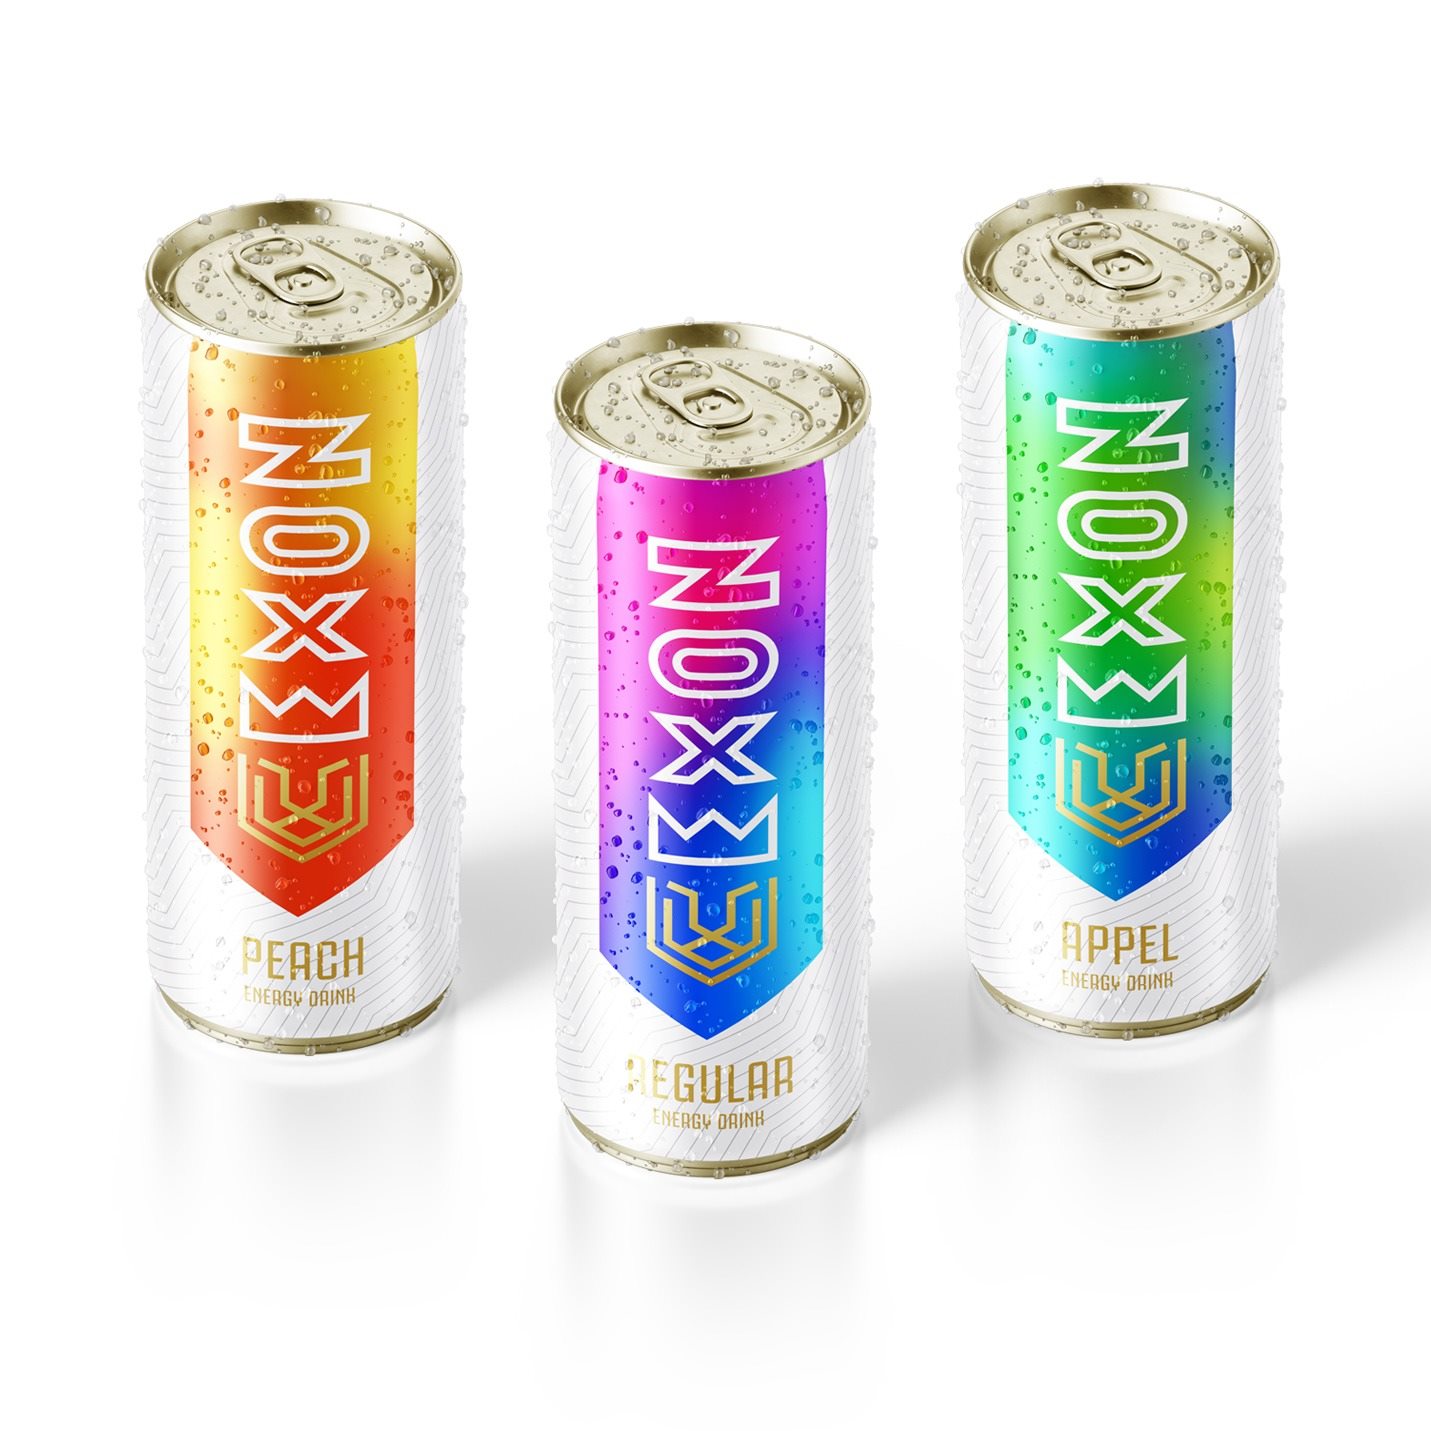 Dezio Media Solutions Create Exon Energy Drink Brand and Packaging Design